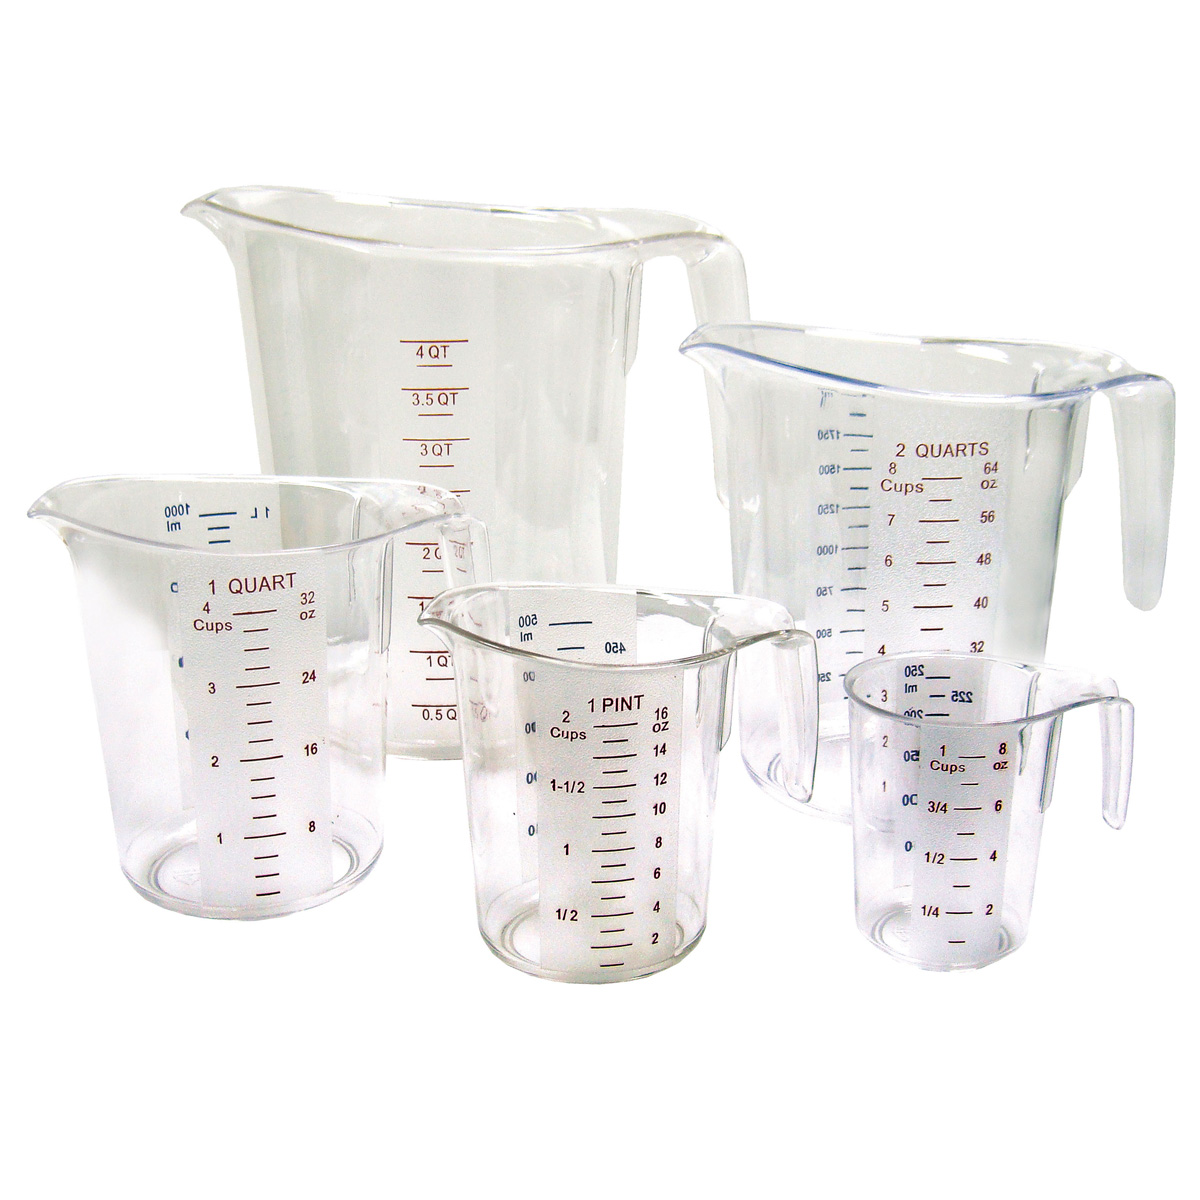 Winware by Winco PMCP-100 Polycarbonate Measuring Cup - 1 Qt. image 1